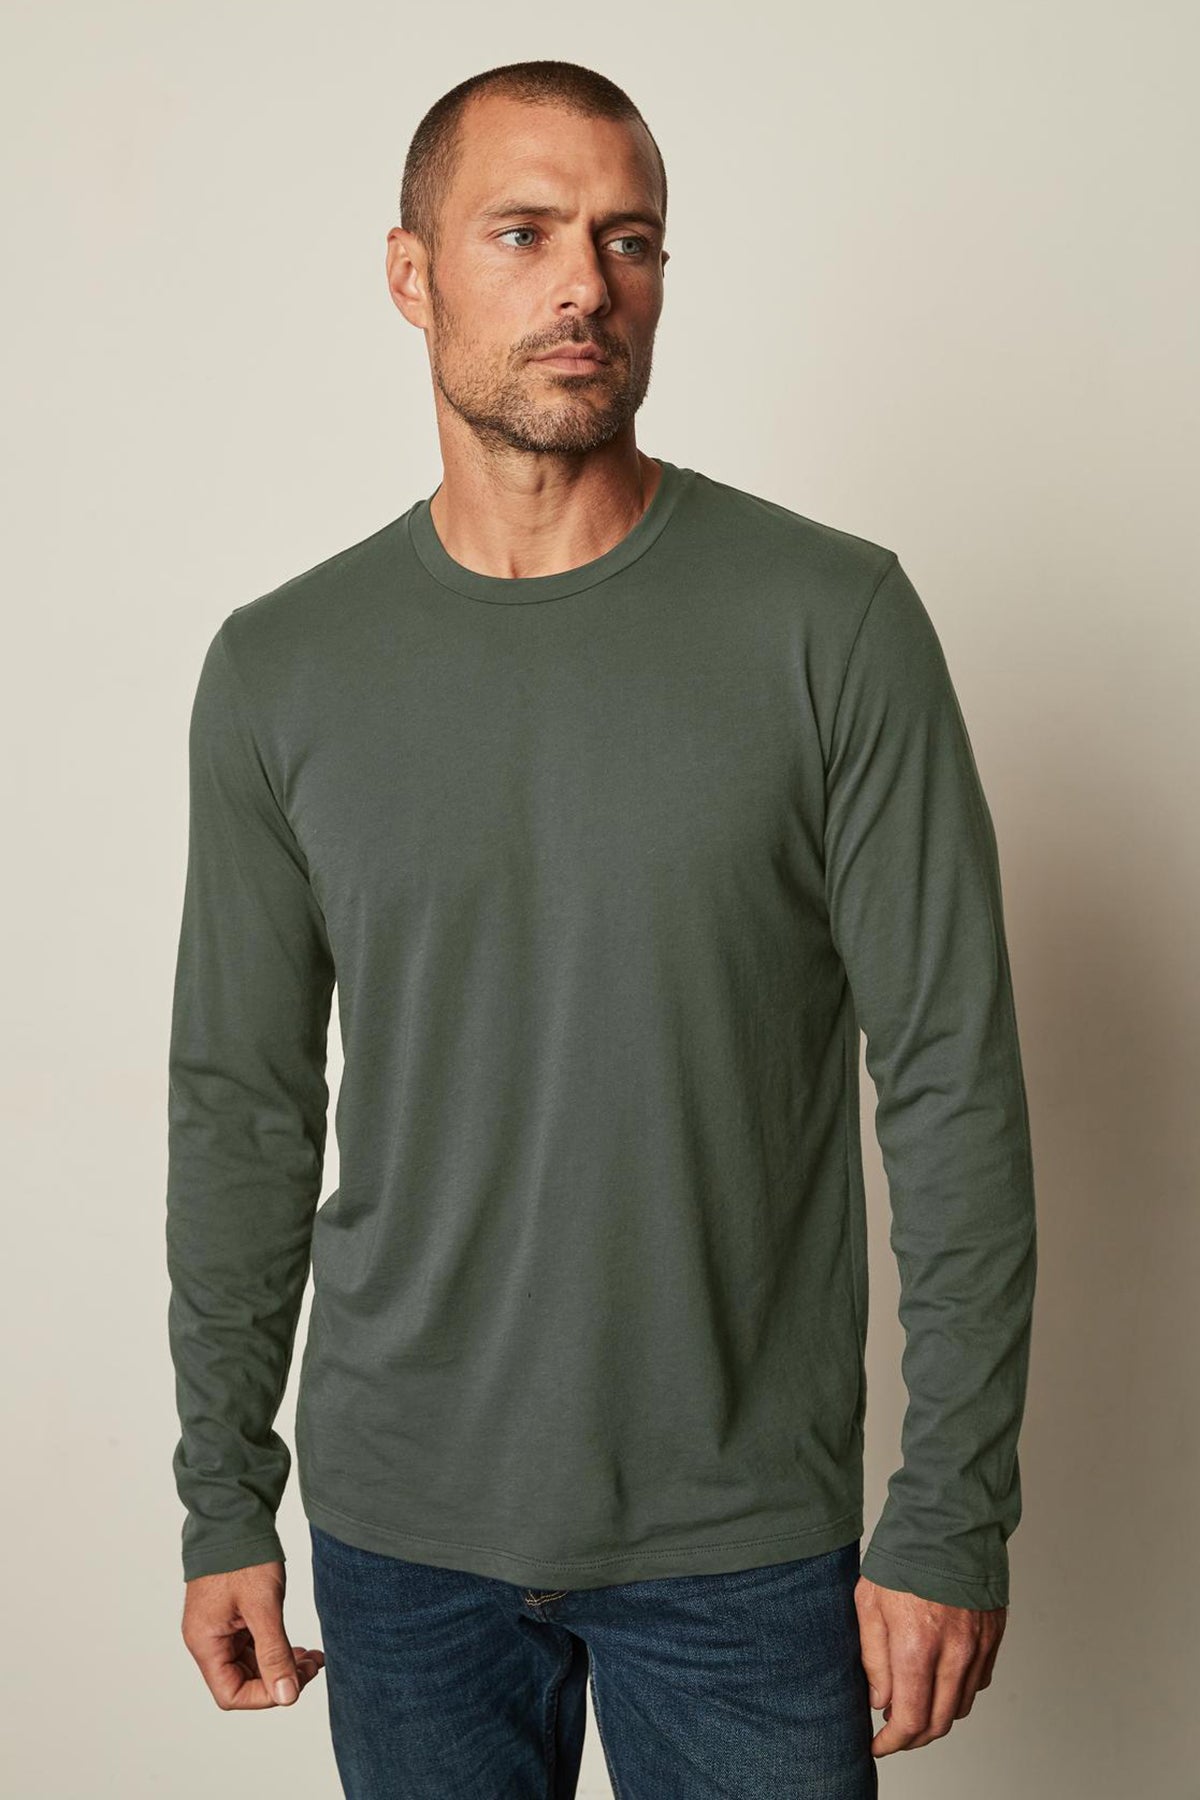 Skeeter Crew Neck Long Sleeve Tee in olive with blue denim front-26684904210625